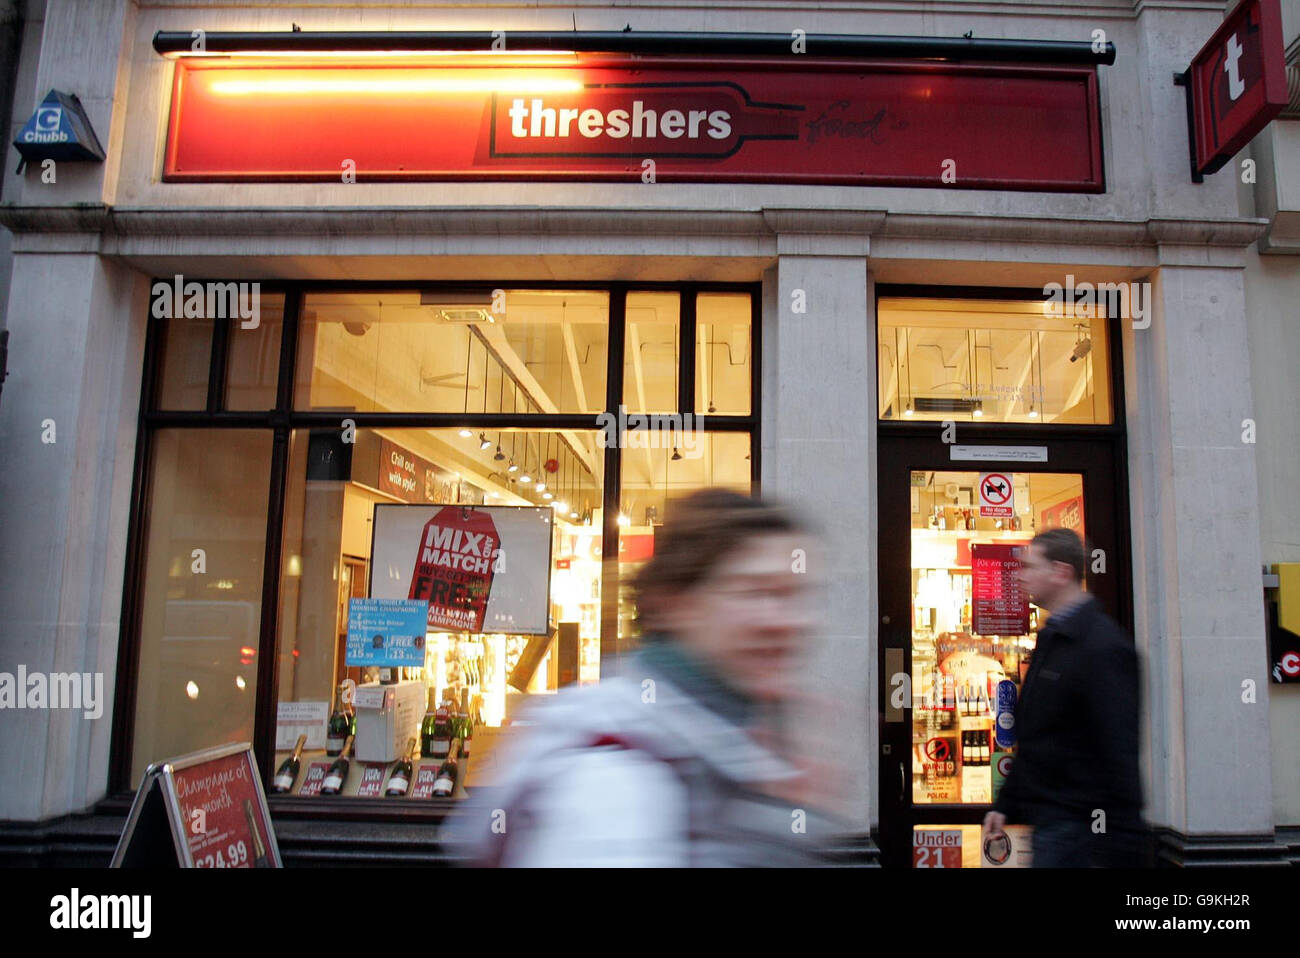 CUSTOMERS TOAST OFF-LICENCE'S 40% OFF VOUCHER ERROR. A Threshers off licence in the City of London. Stock Photo